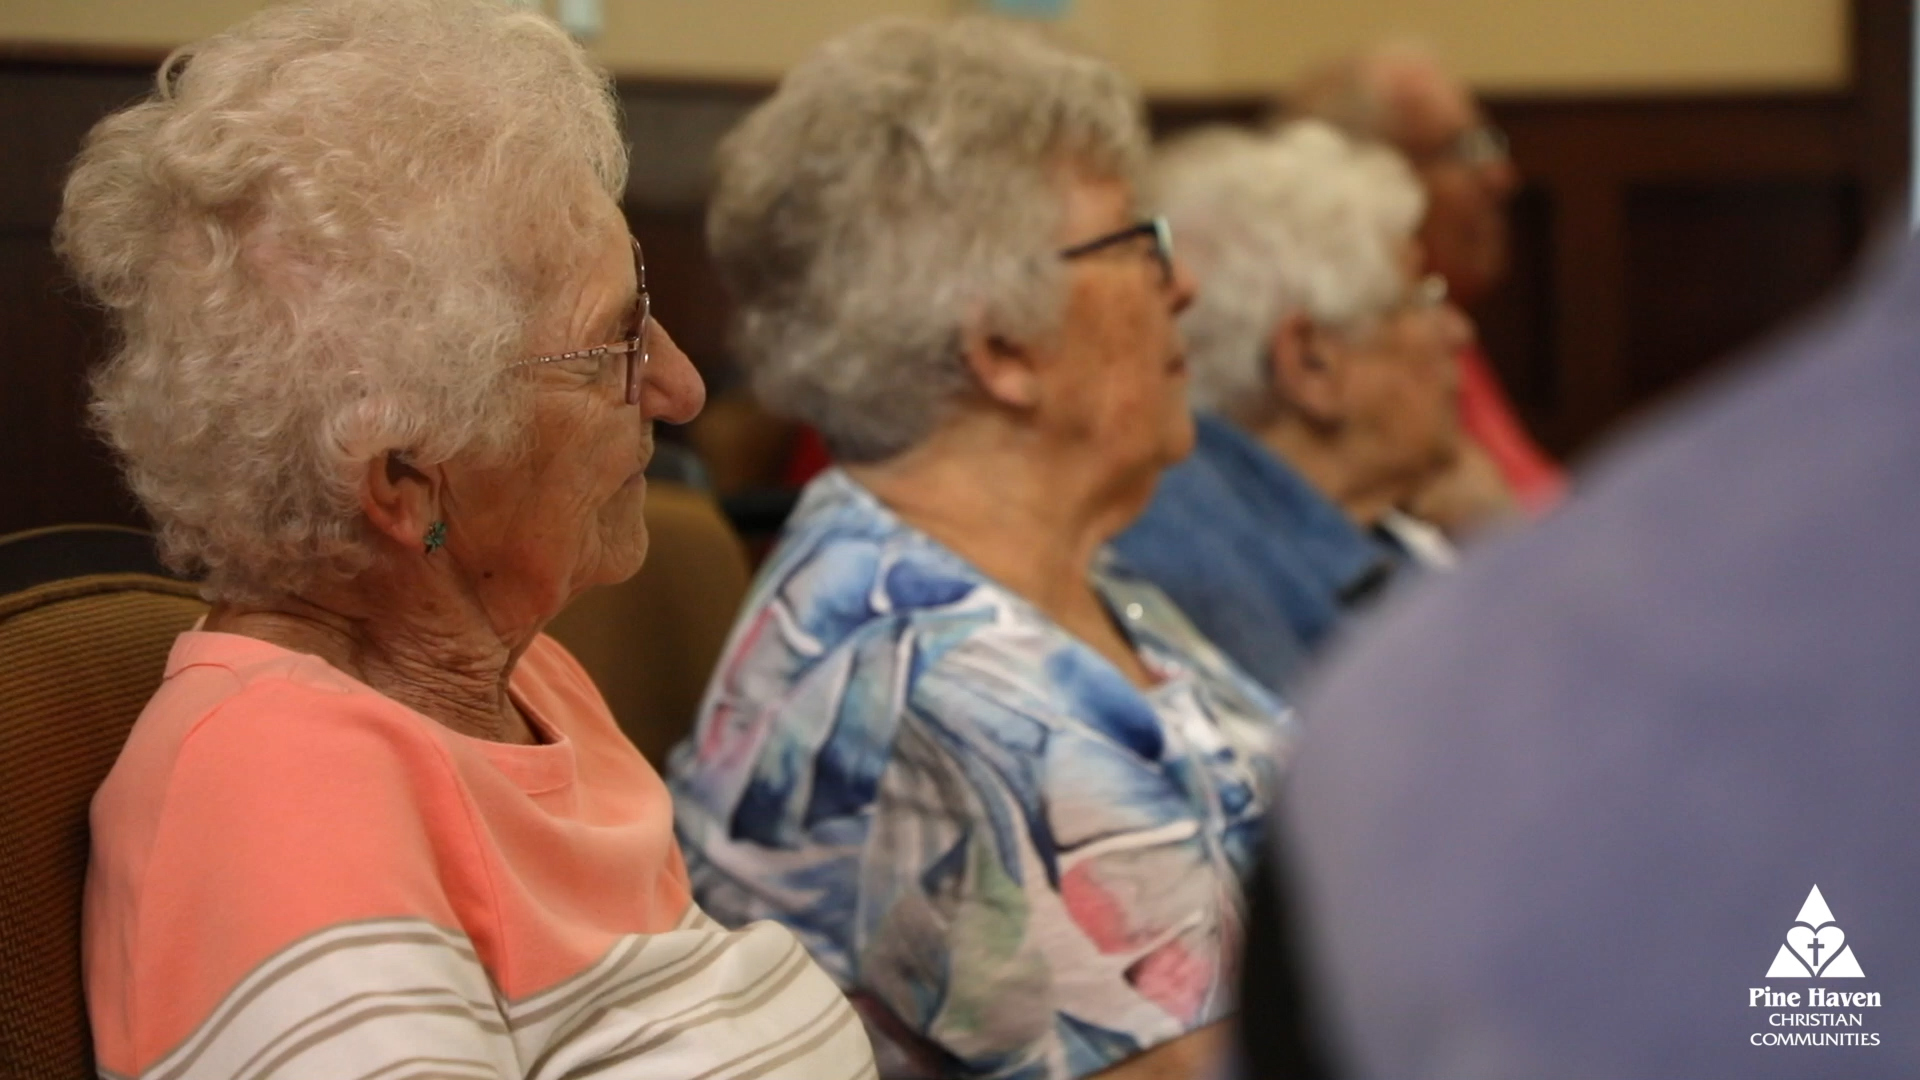 Pine Haven residents watching a performance